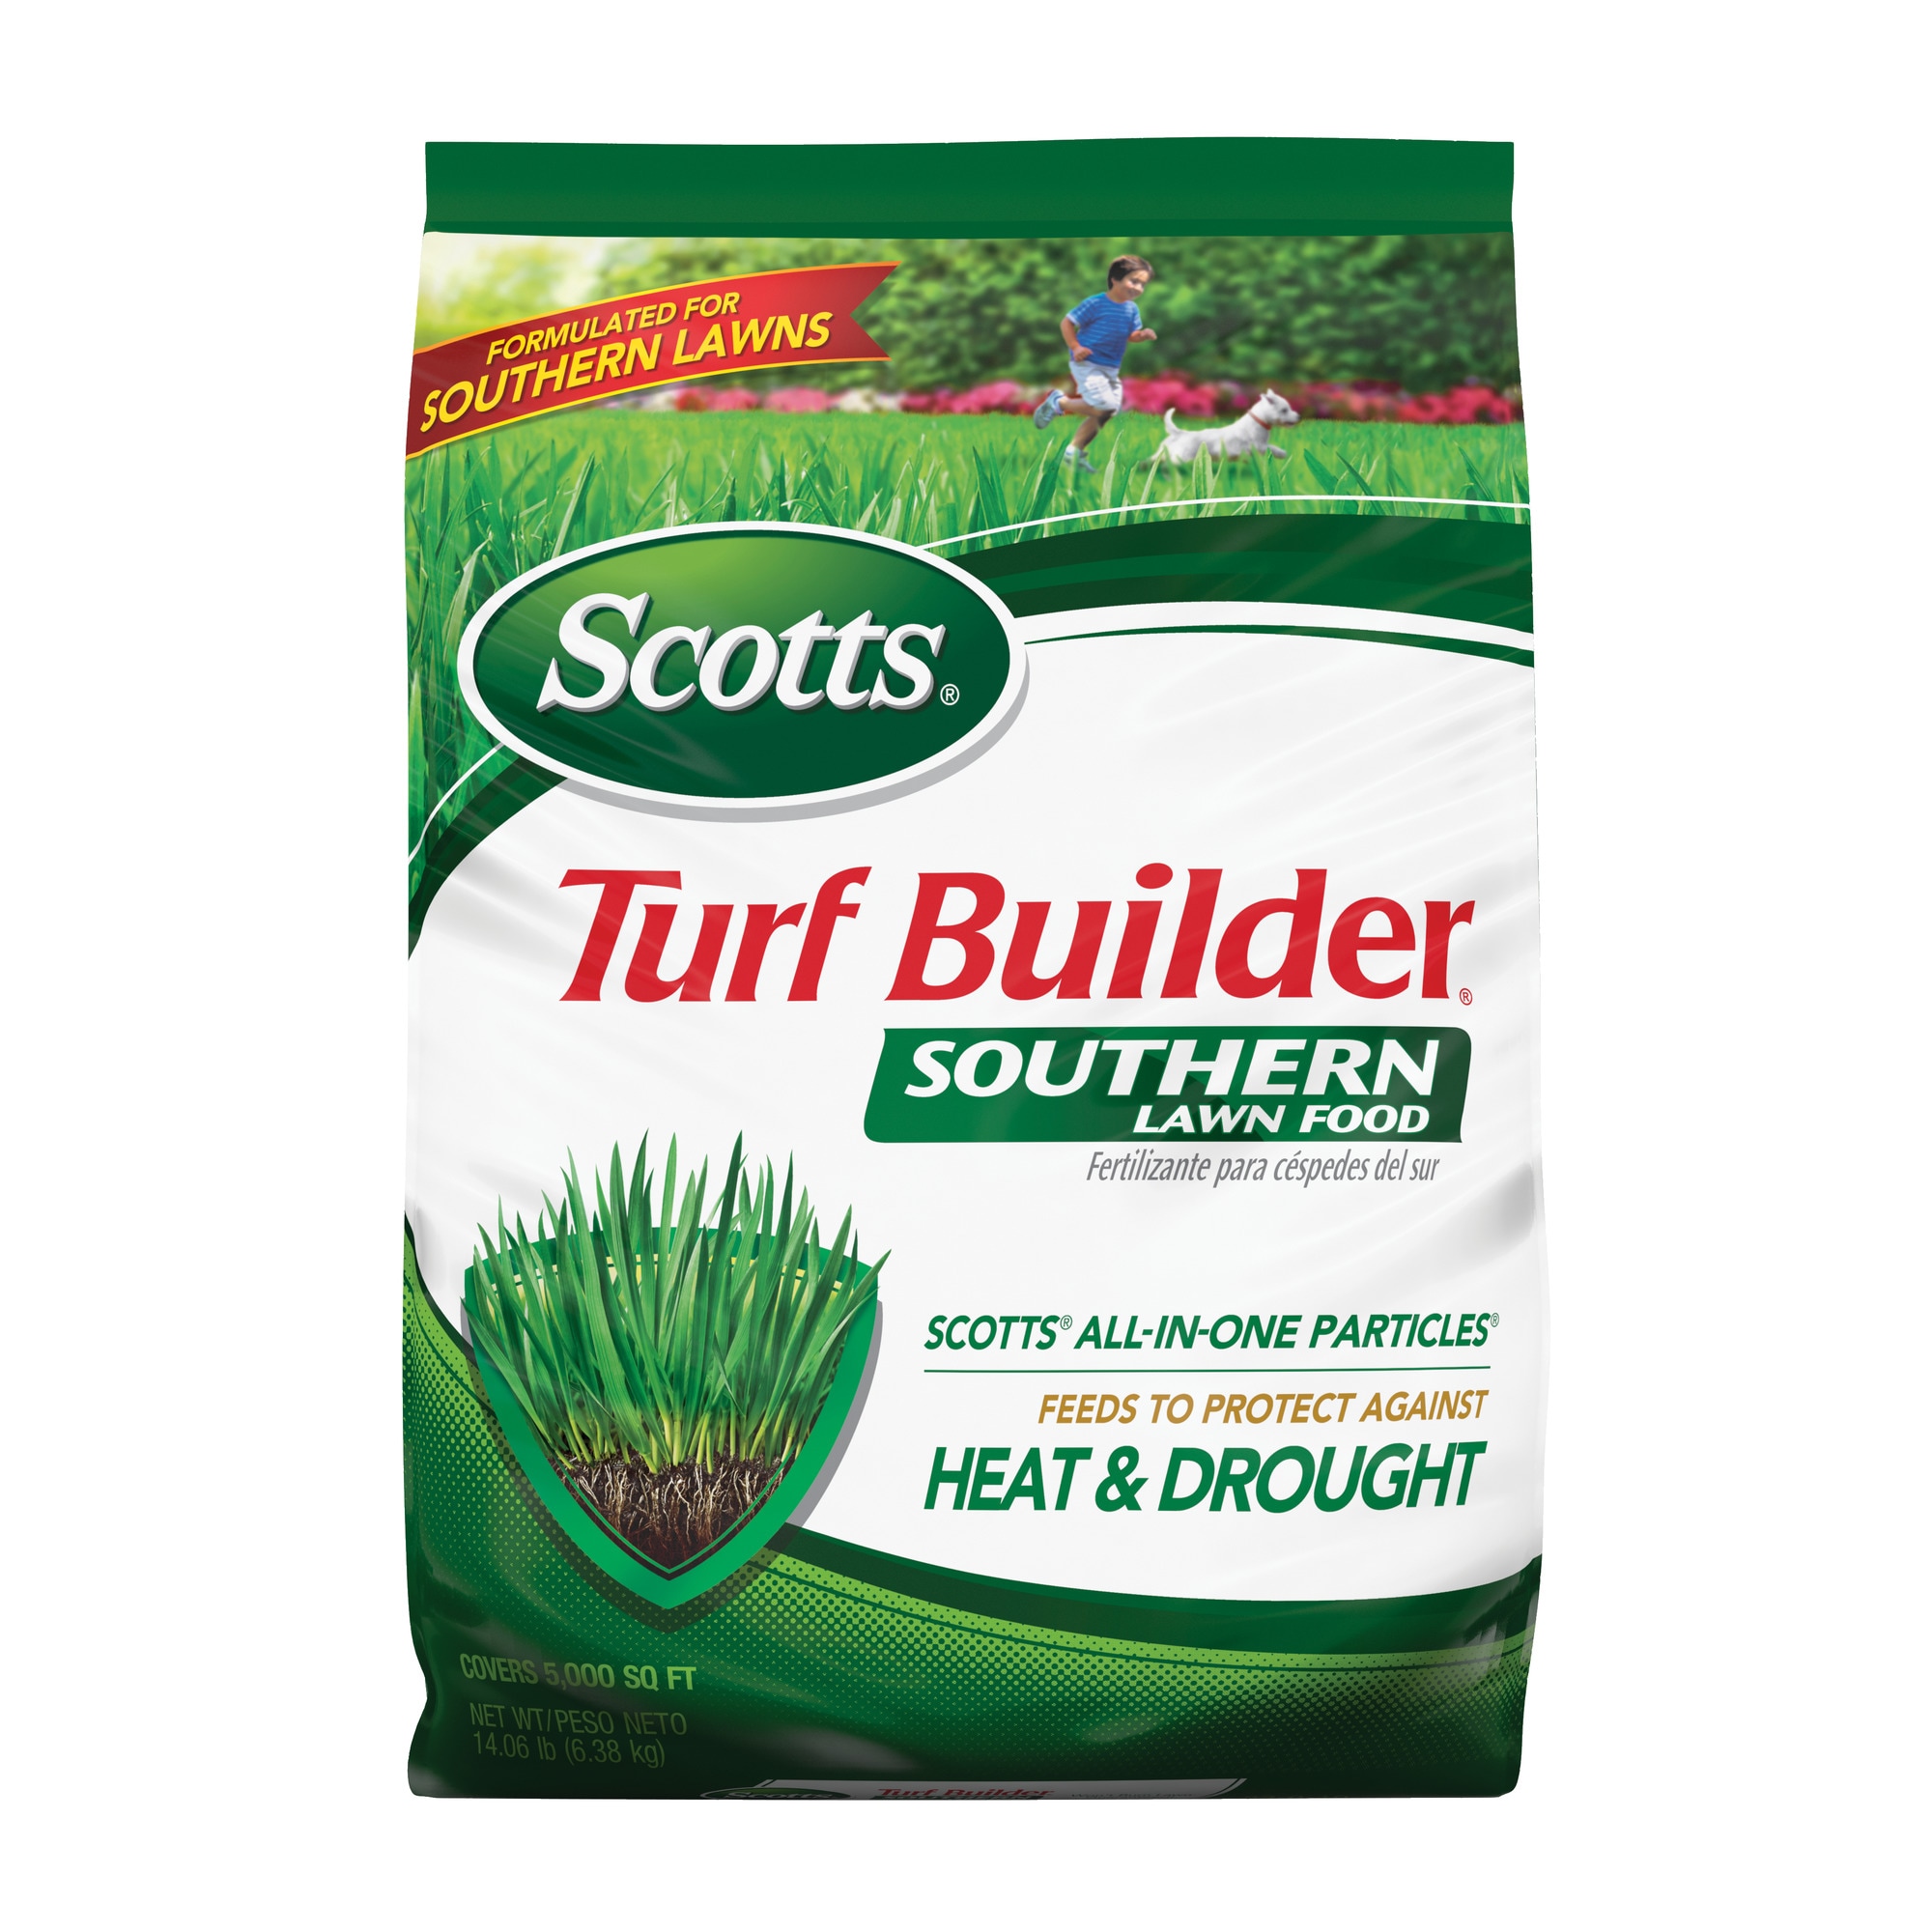 Image of Lawn care products from Scotts at Lowes